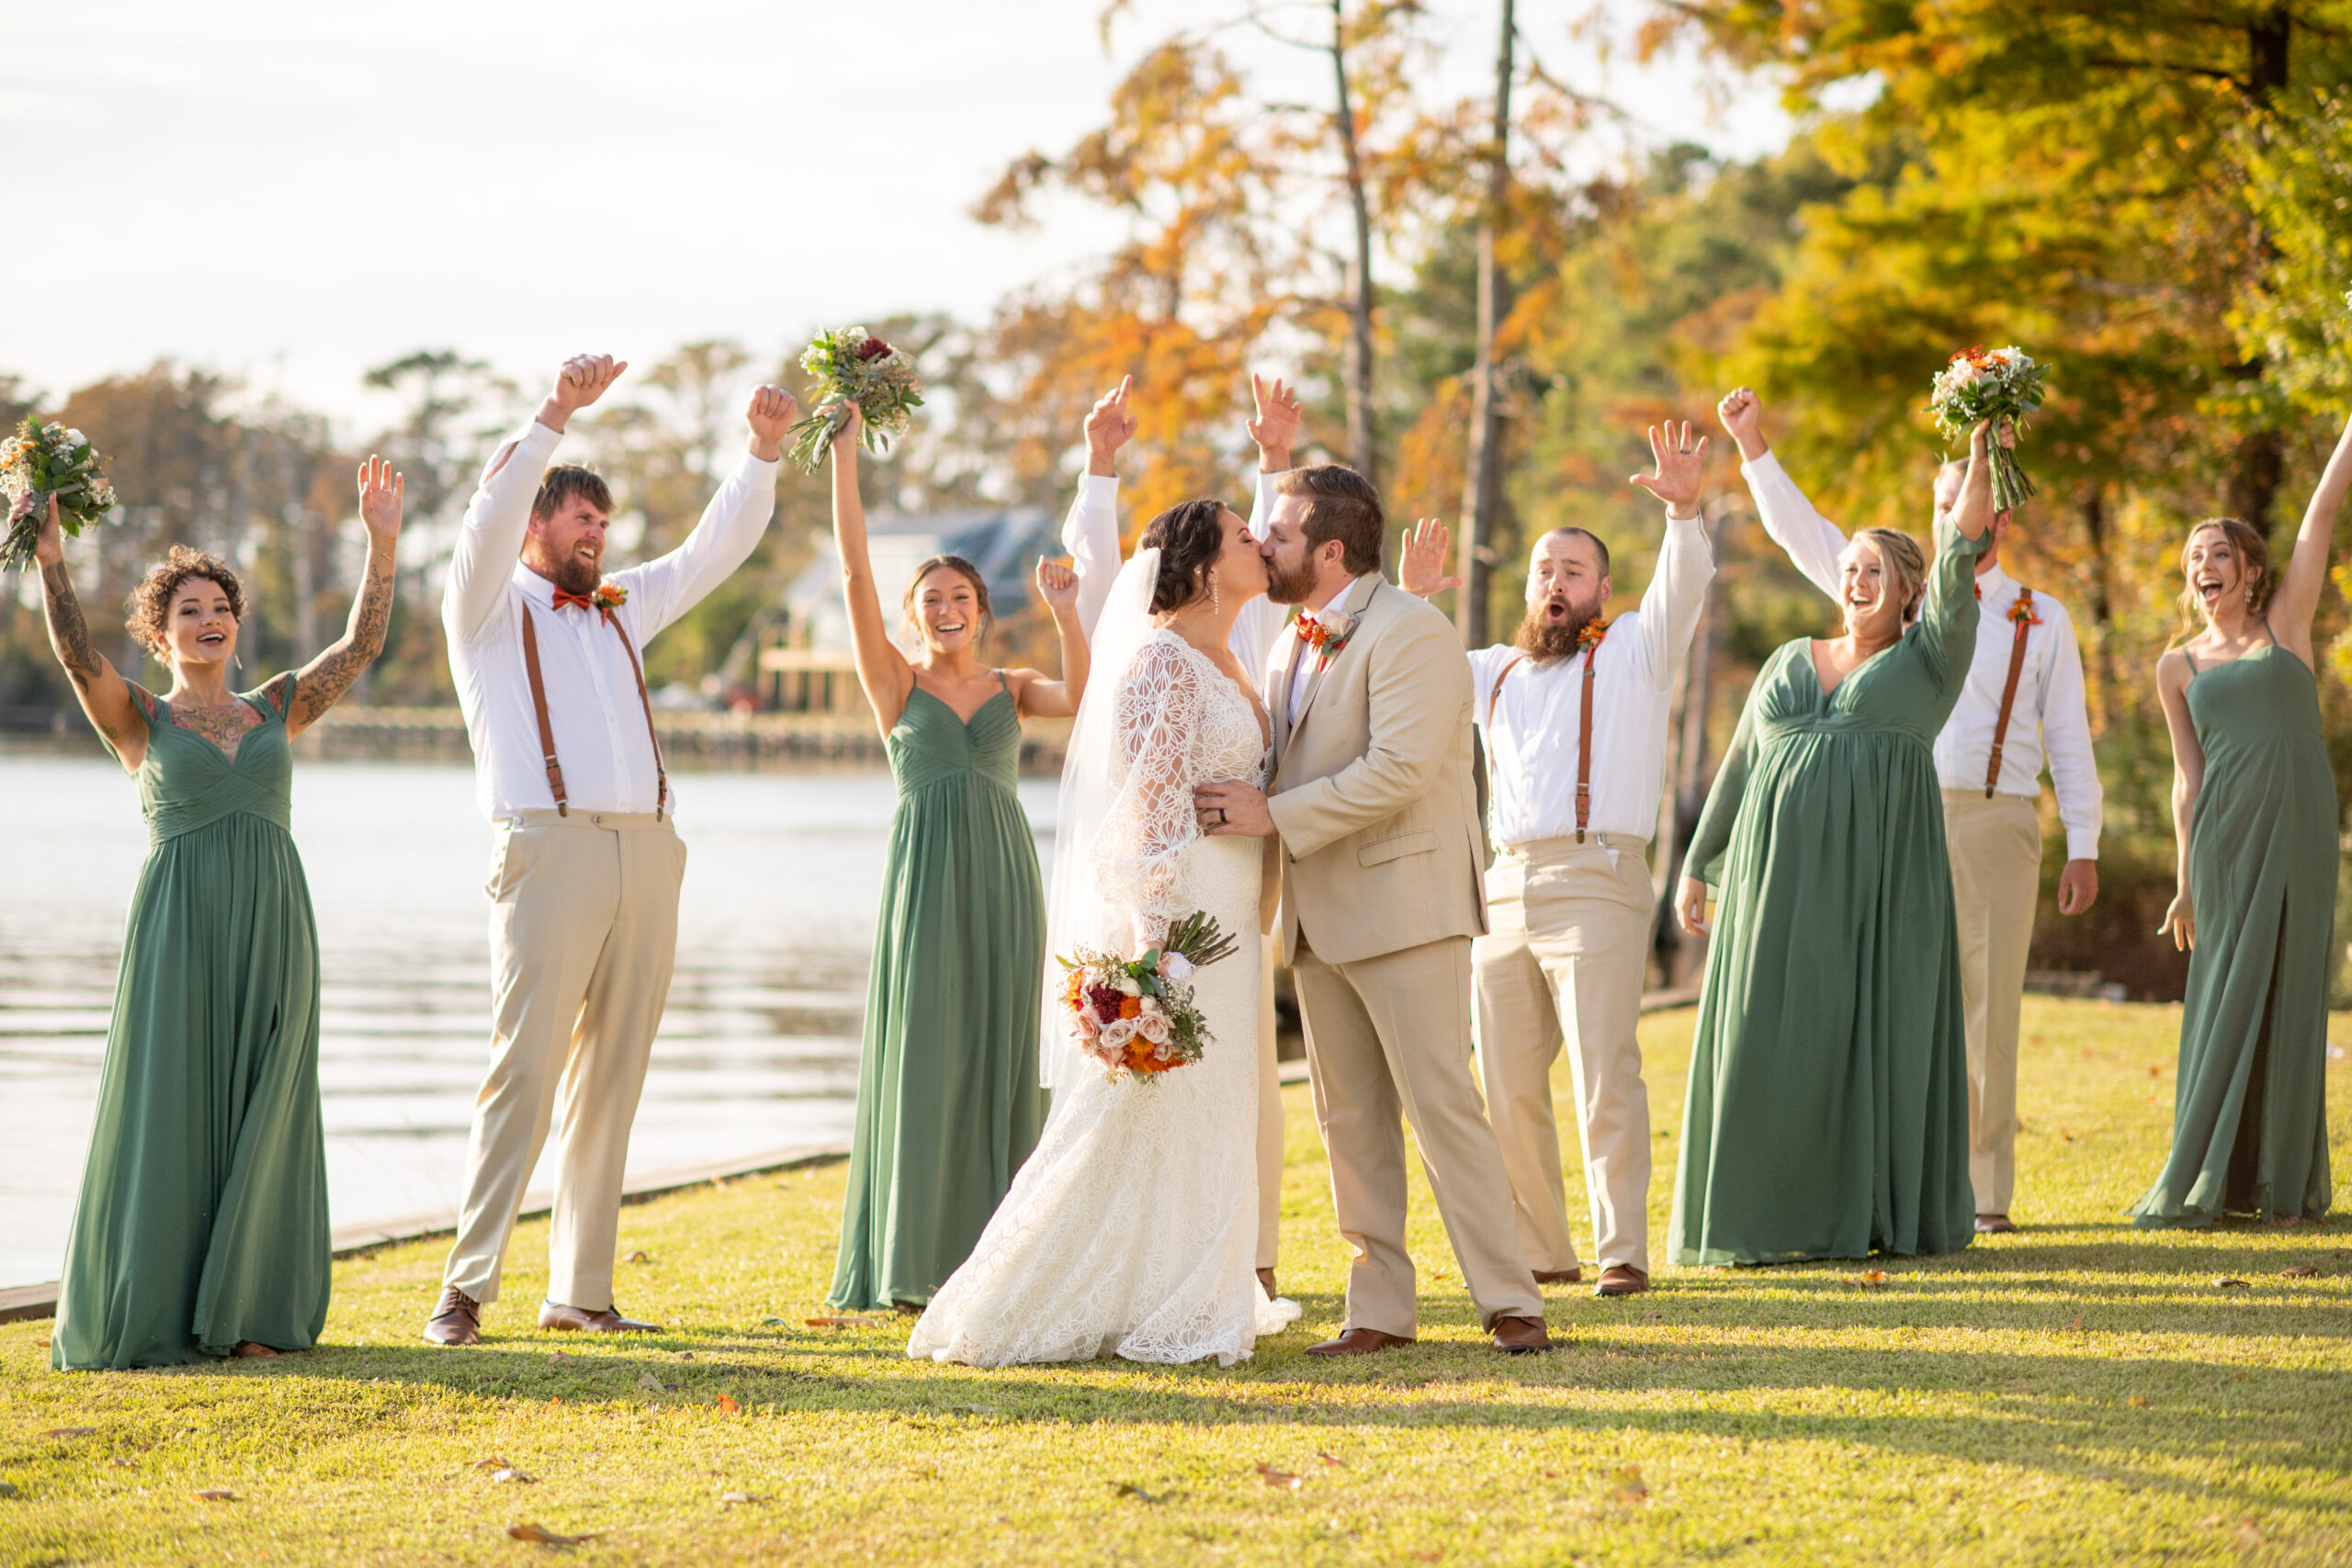 Wedding party celebrates Bride and Groom kissing after ceremony